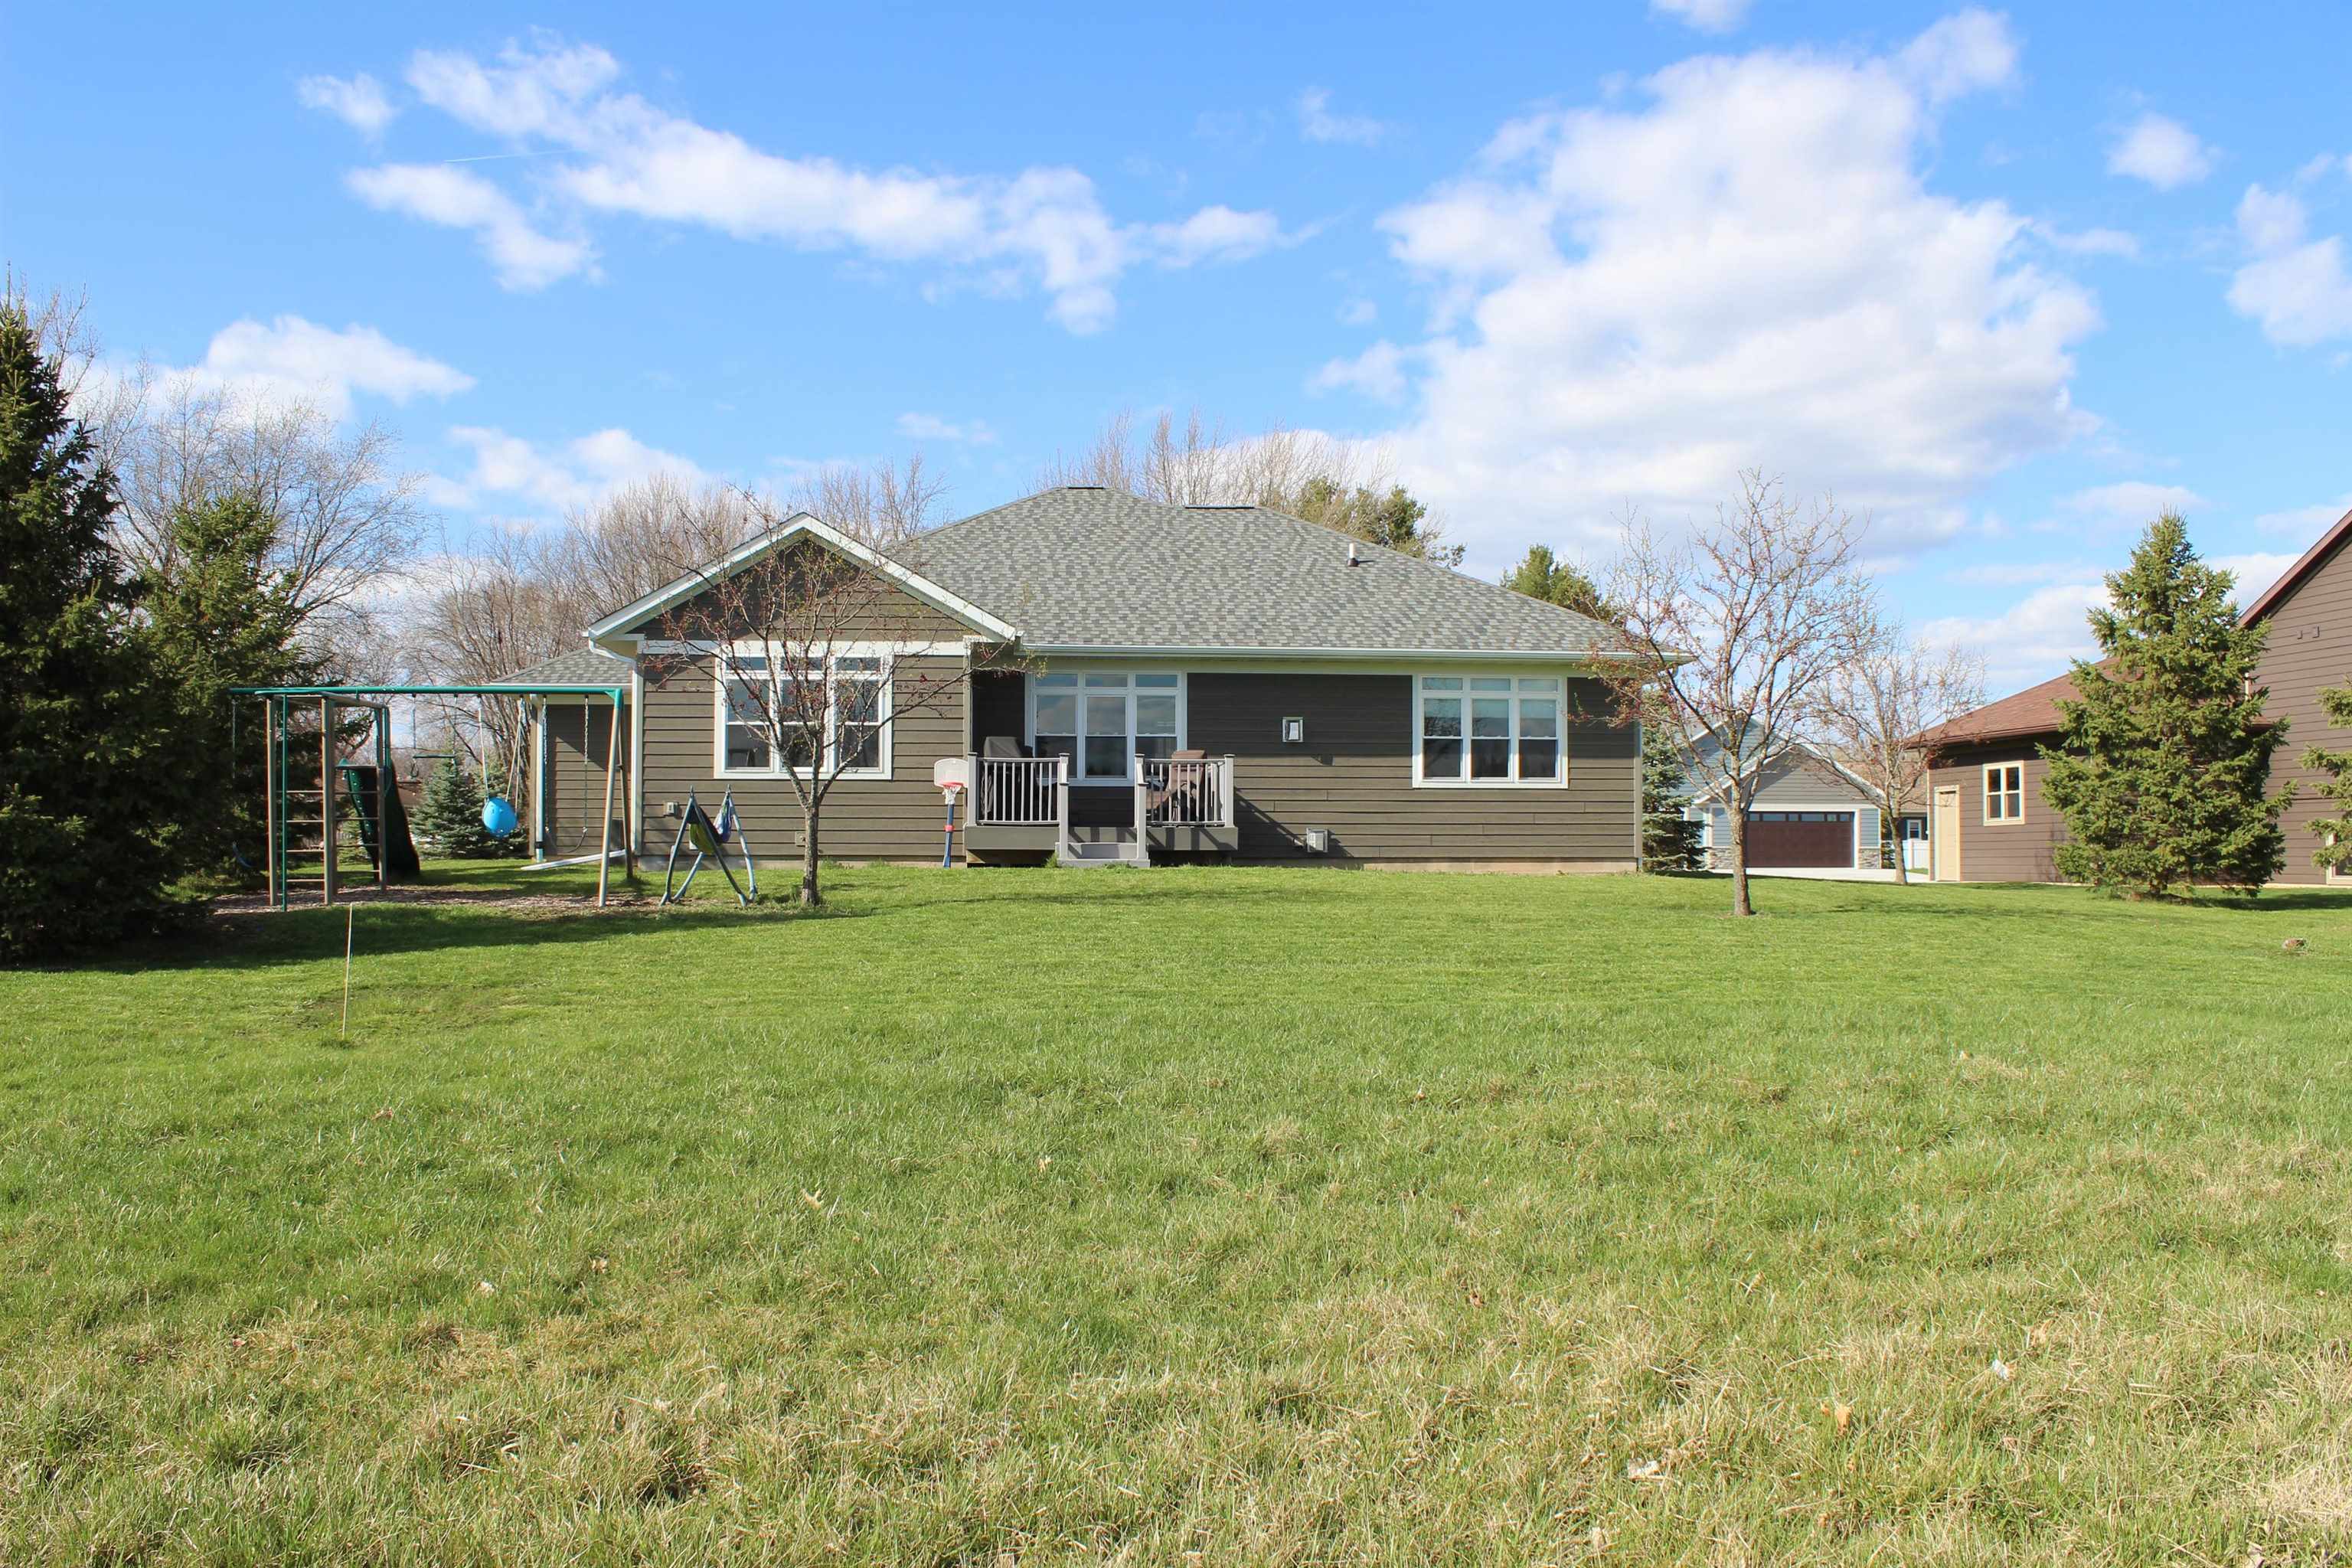 1406 E 20TH STREET, Marshfield, Wisconsin 54449, 4 Bedrooms Bedrooms, ,3 BathroomsBathrooms,Residential,For Sale,1406 E 20TH STREET,22401472